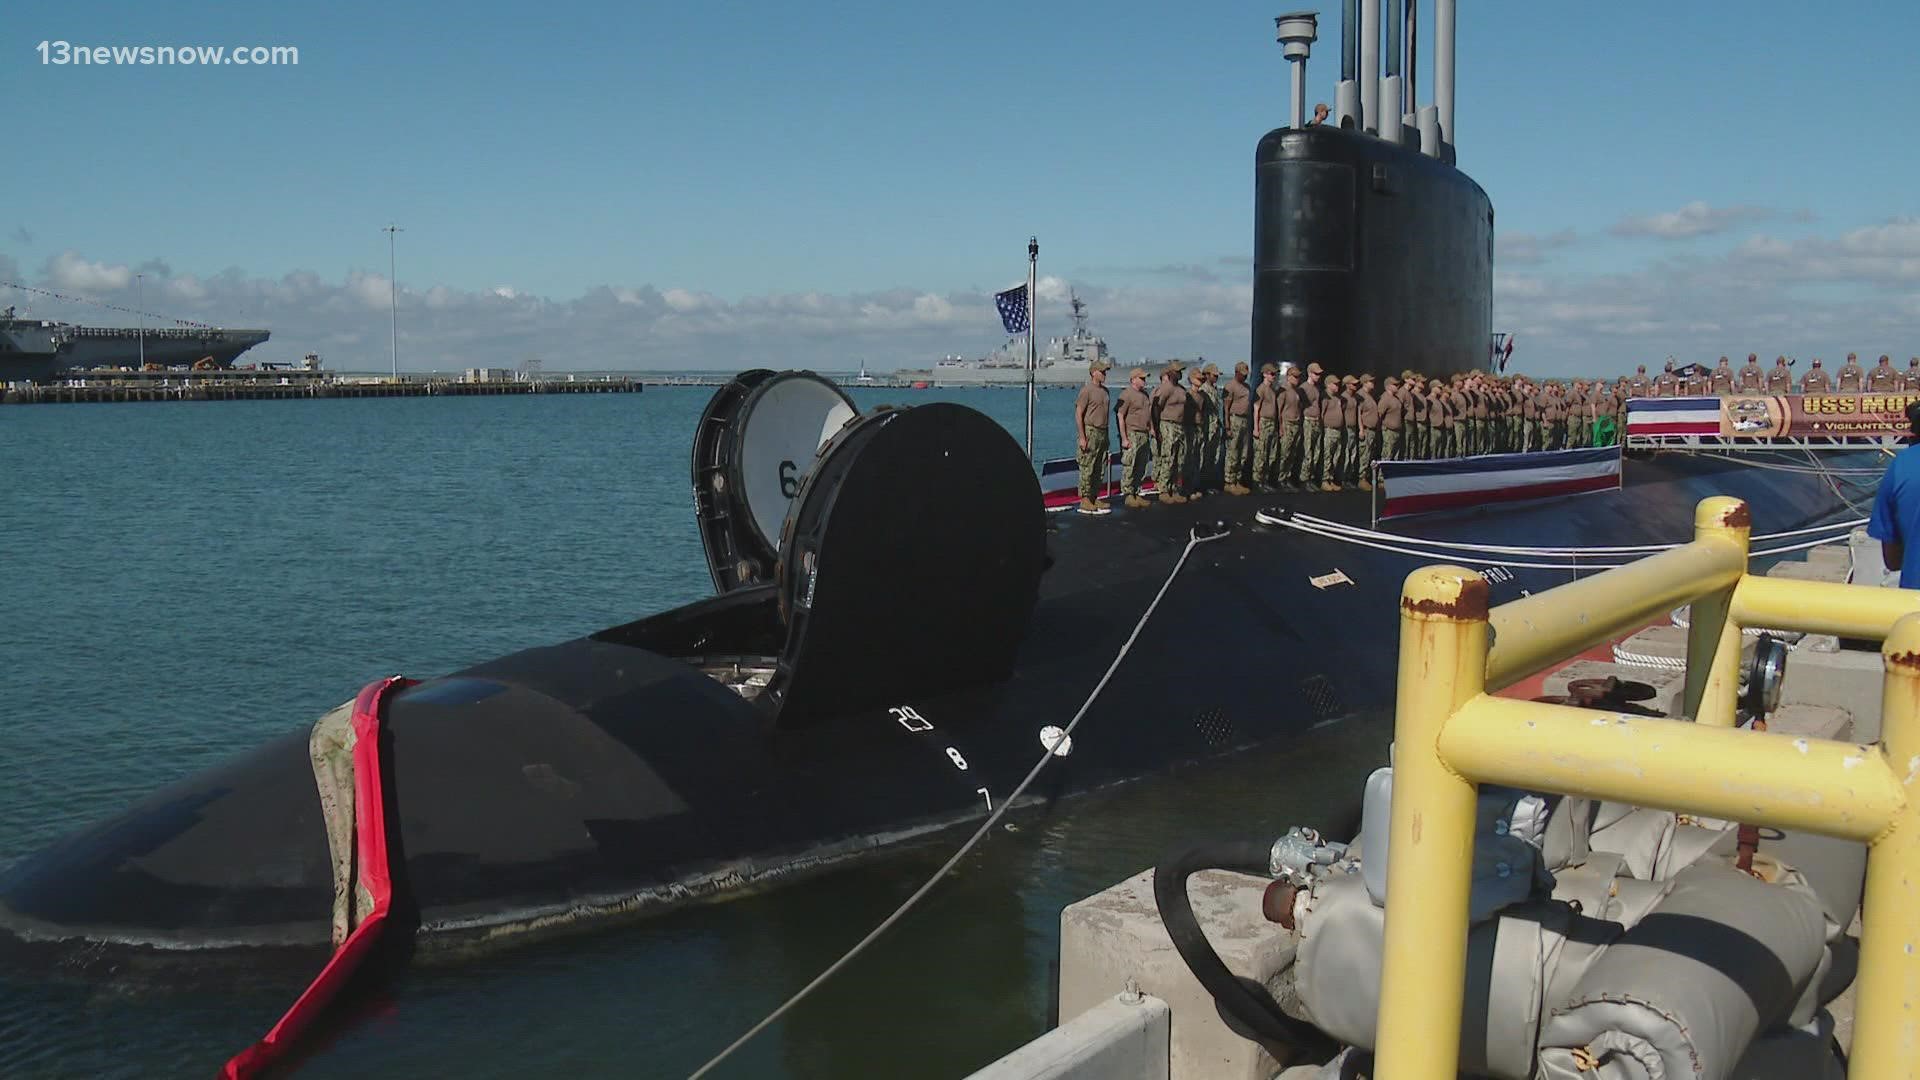 When she is commissioned, USS Montana will become the Navy's 21st Virginia Class submarine. The plan is to build 66 of them, between now and 2043.